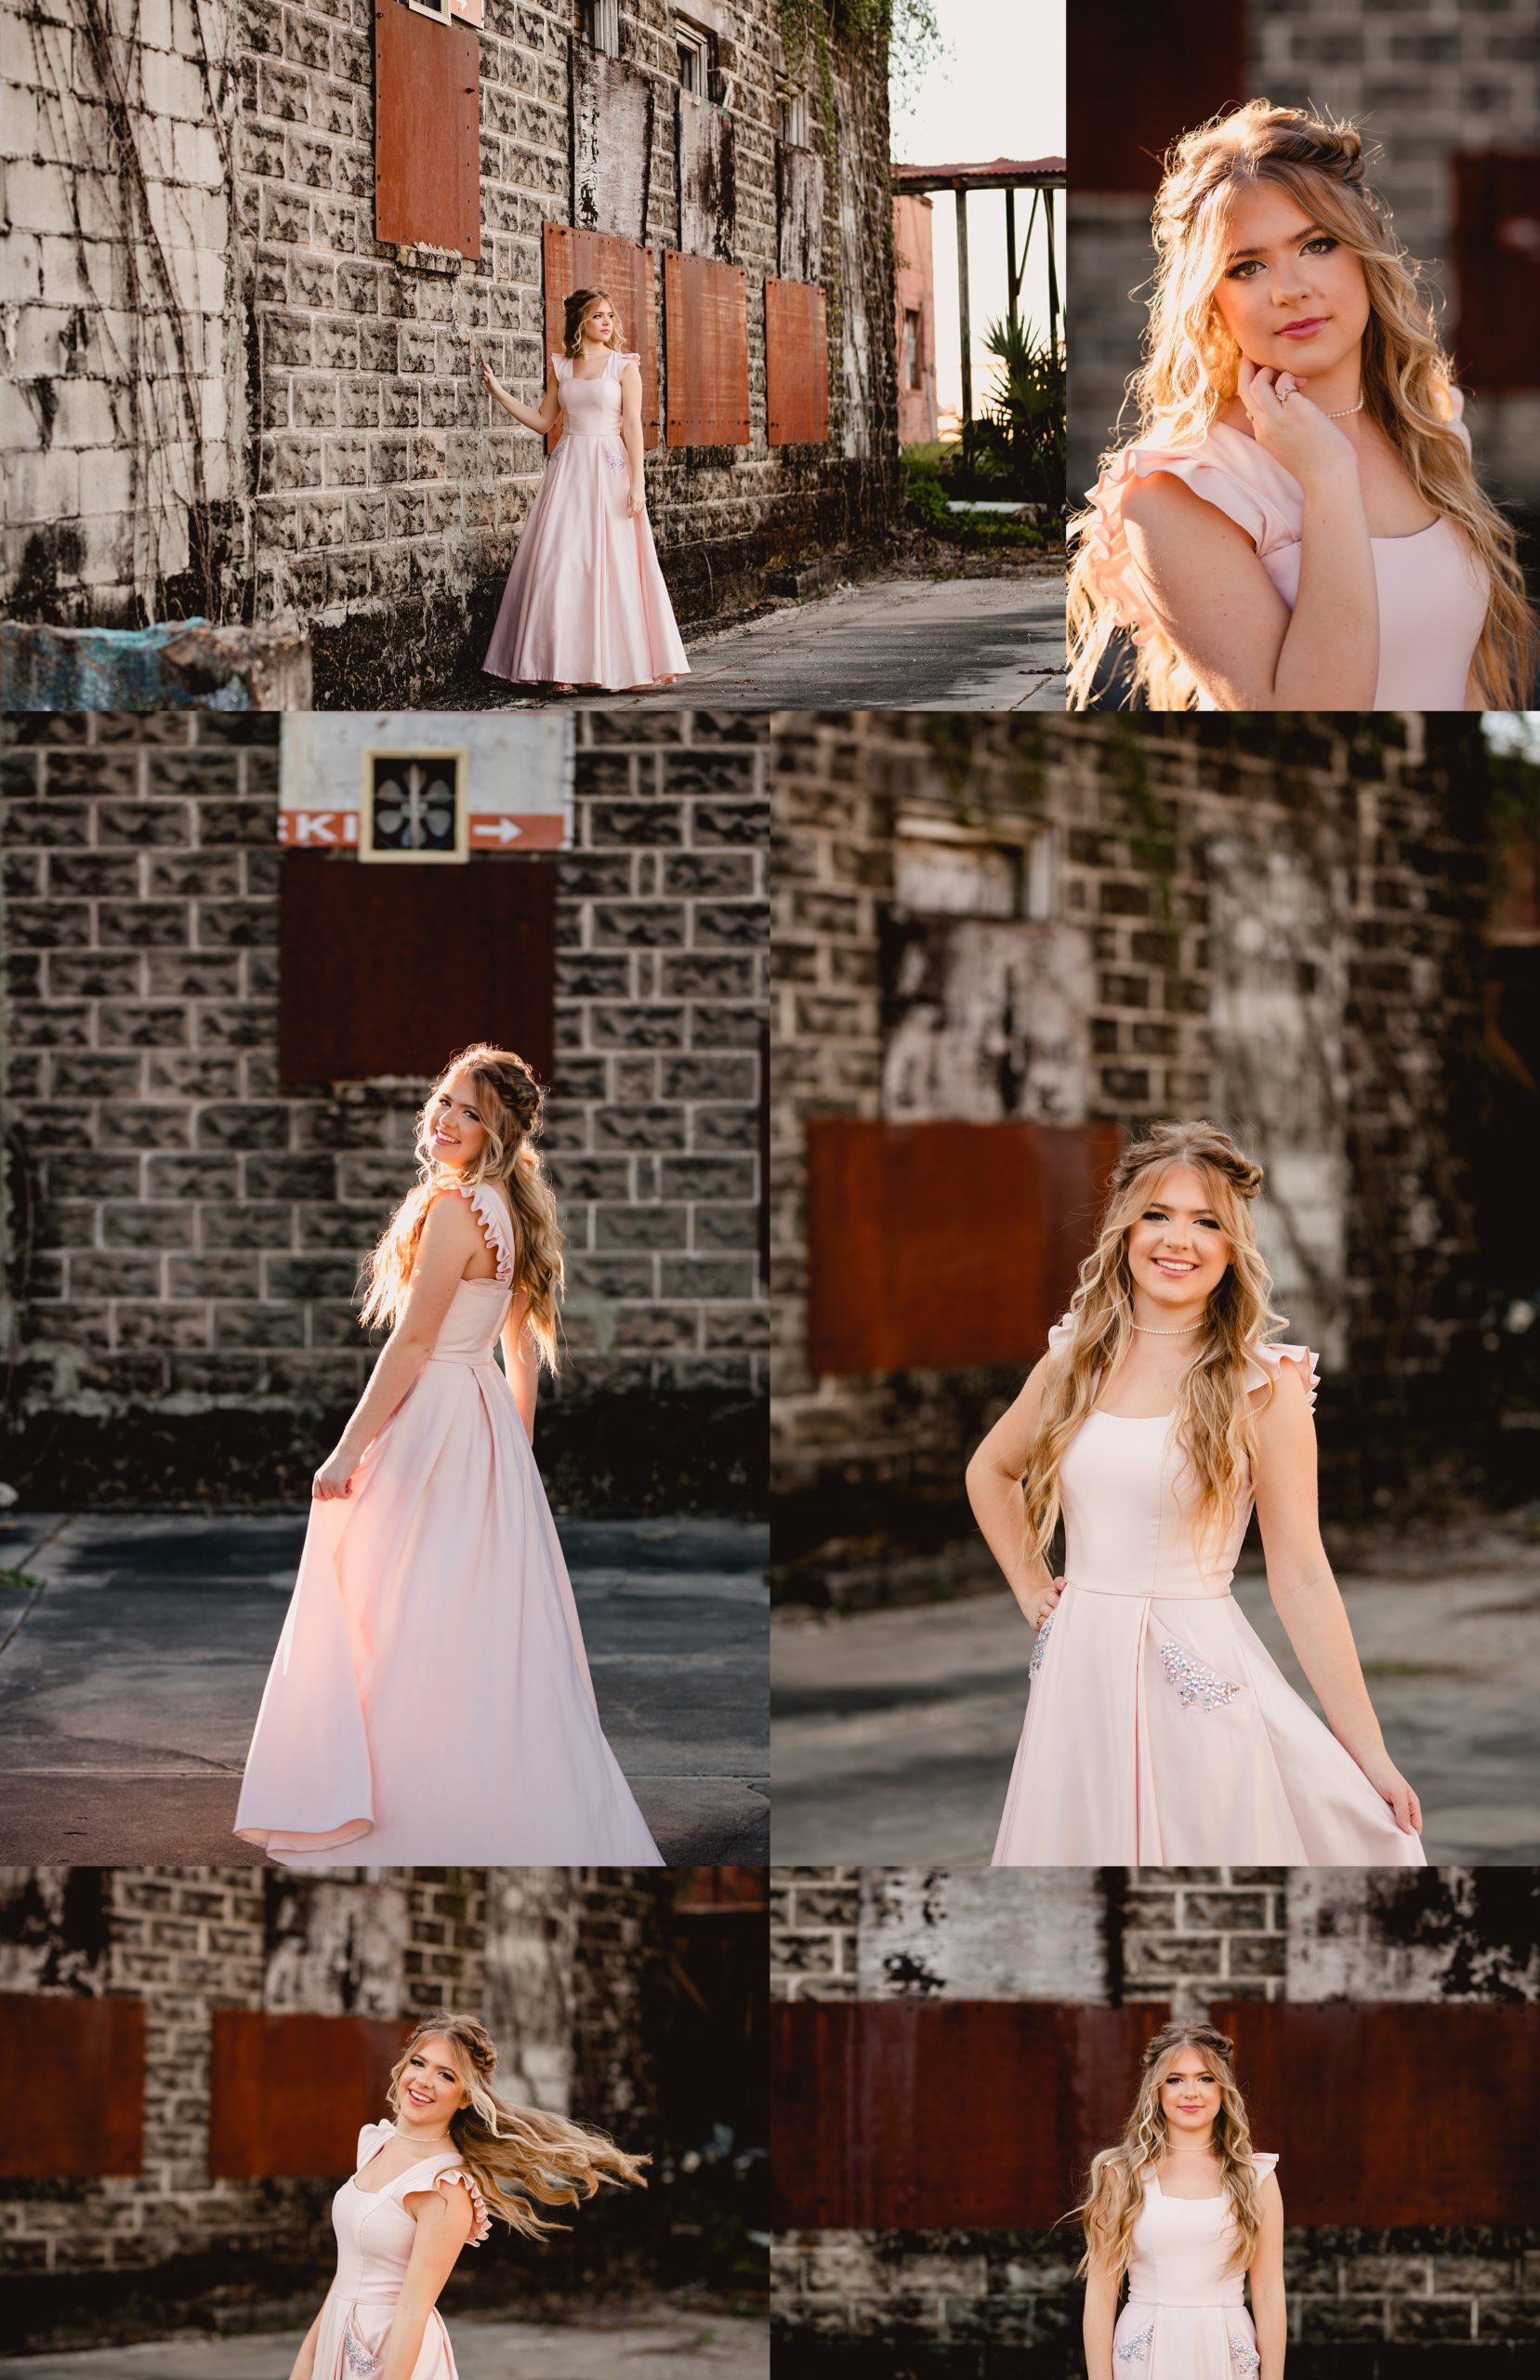 Rustic senior pictures taken with prom dress by buildings. Lake City FL